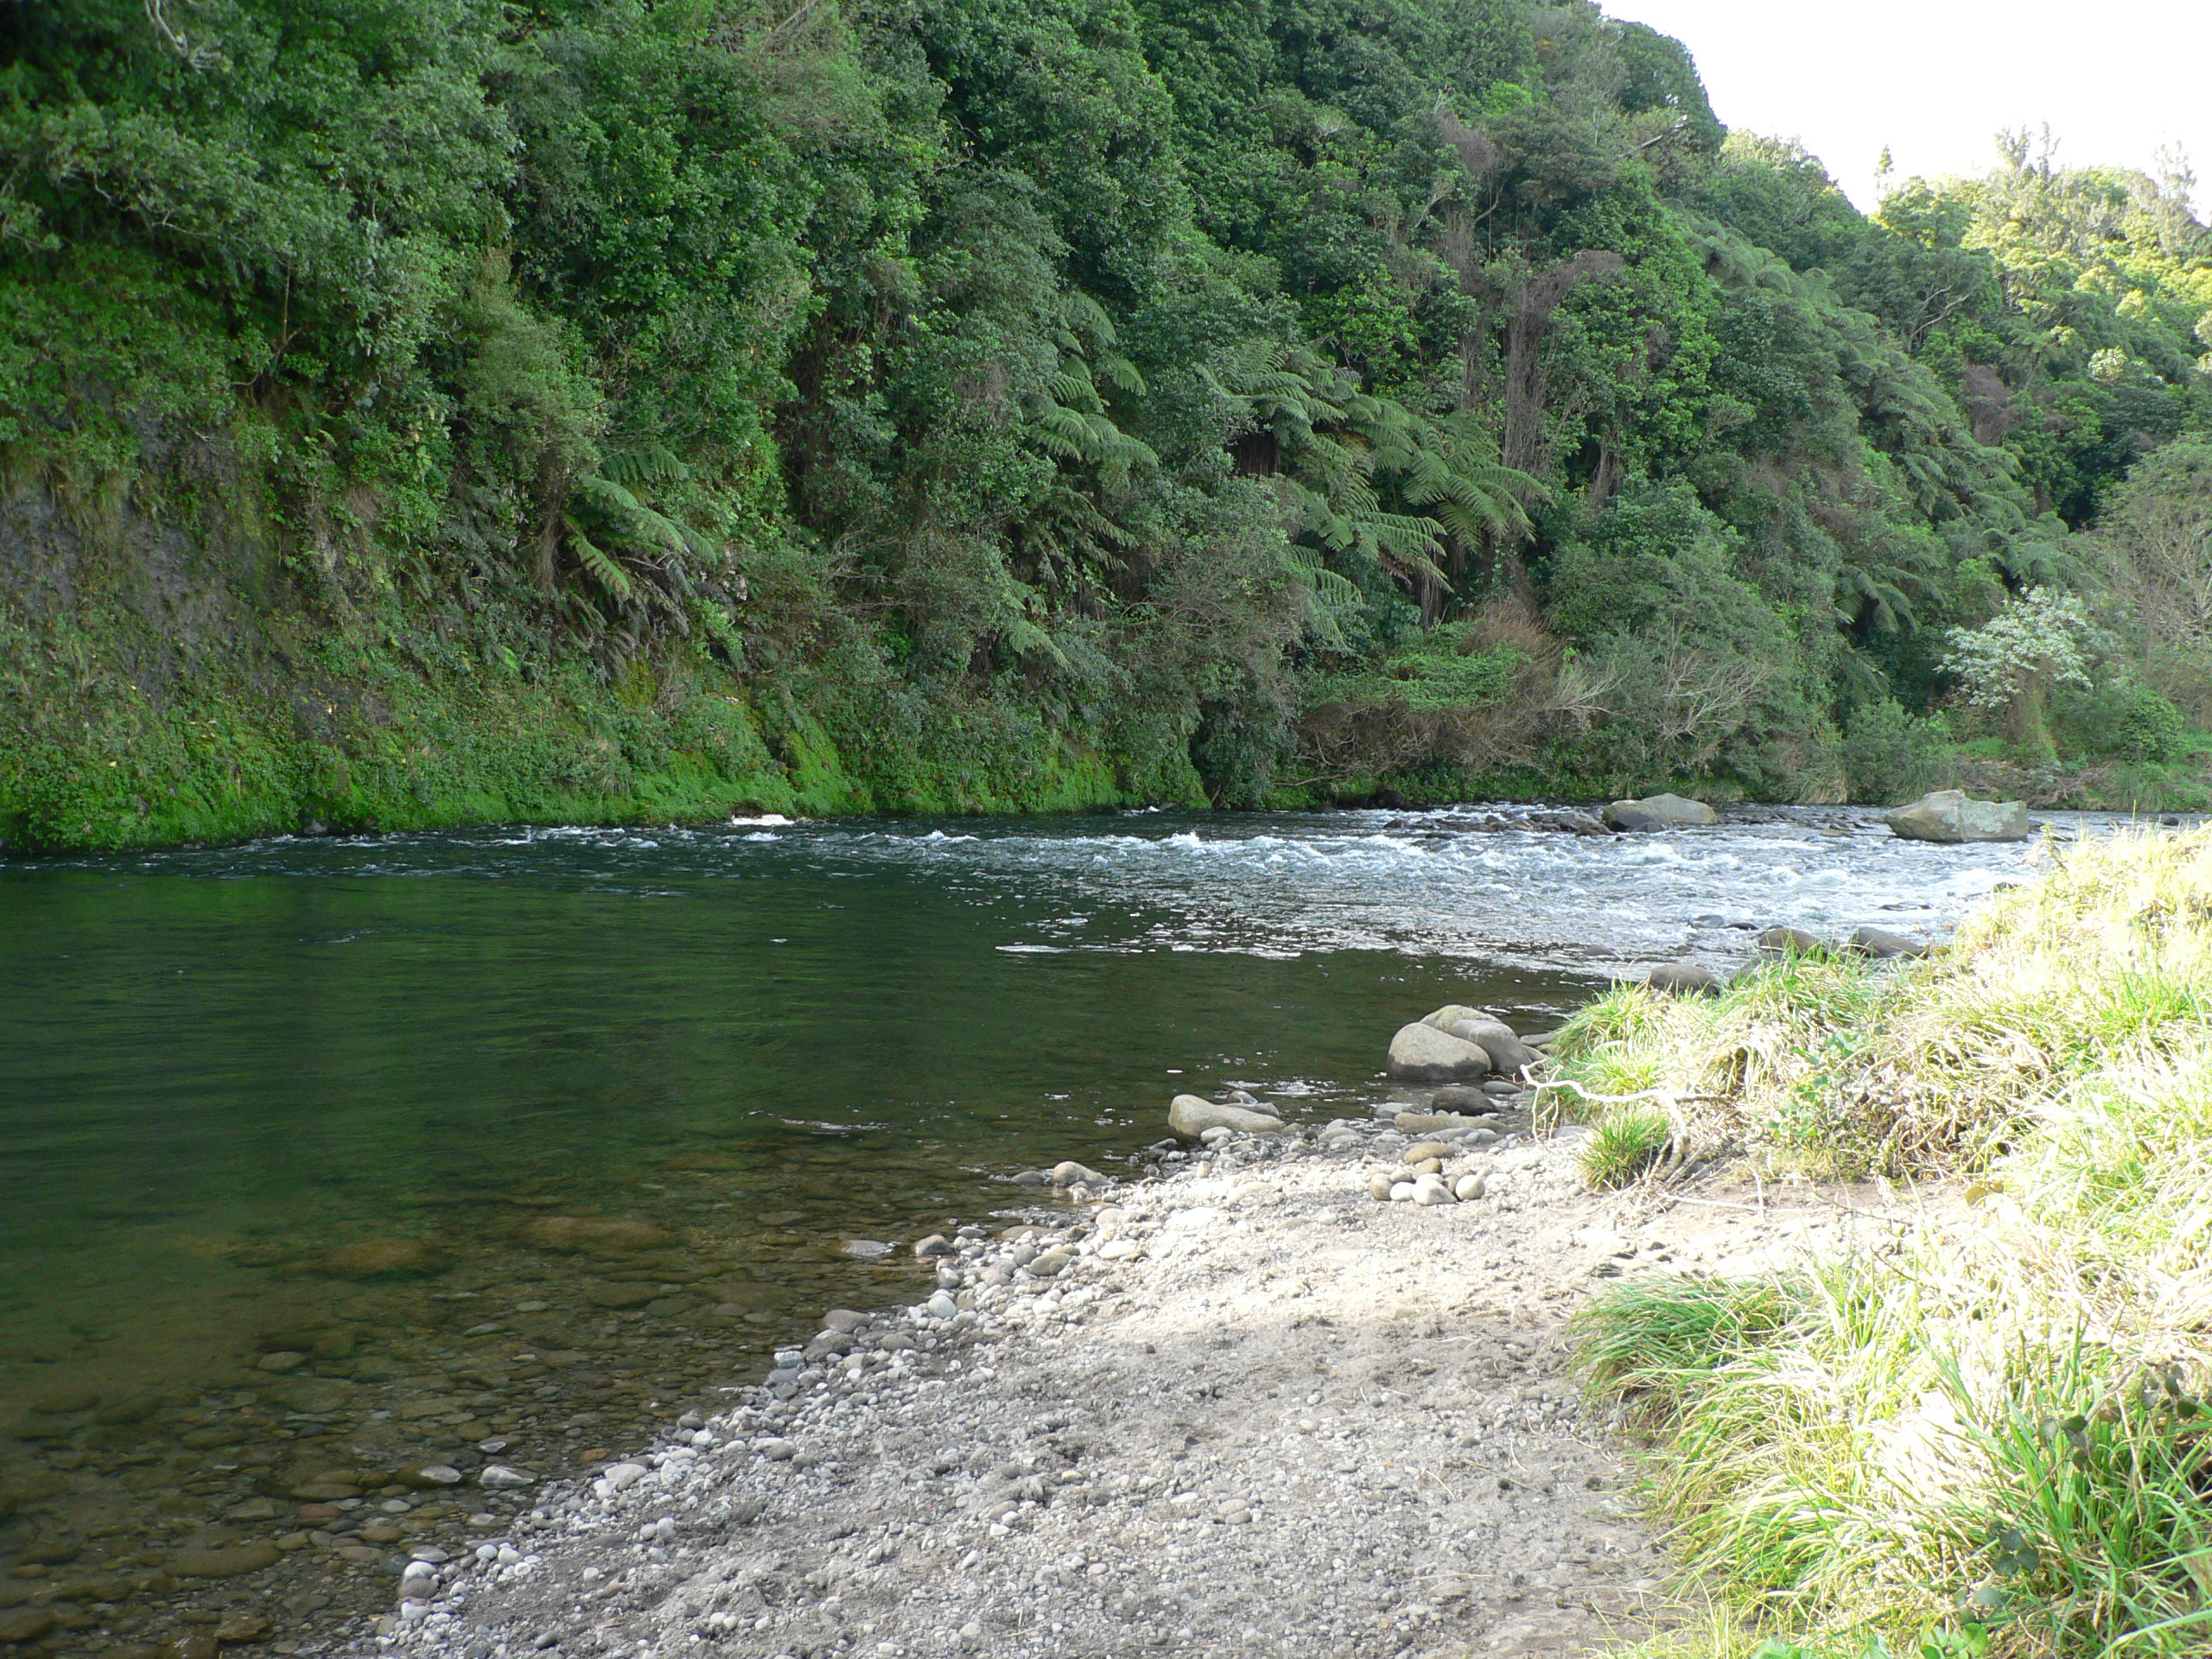 Fish water in the winter fishing section of the lower Waiwhakaiho River